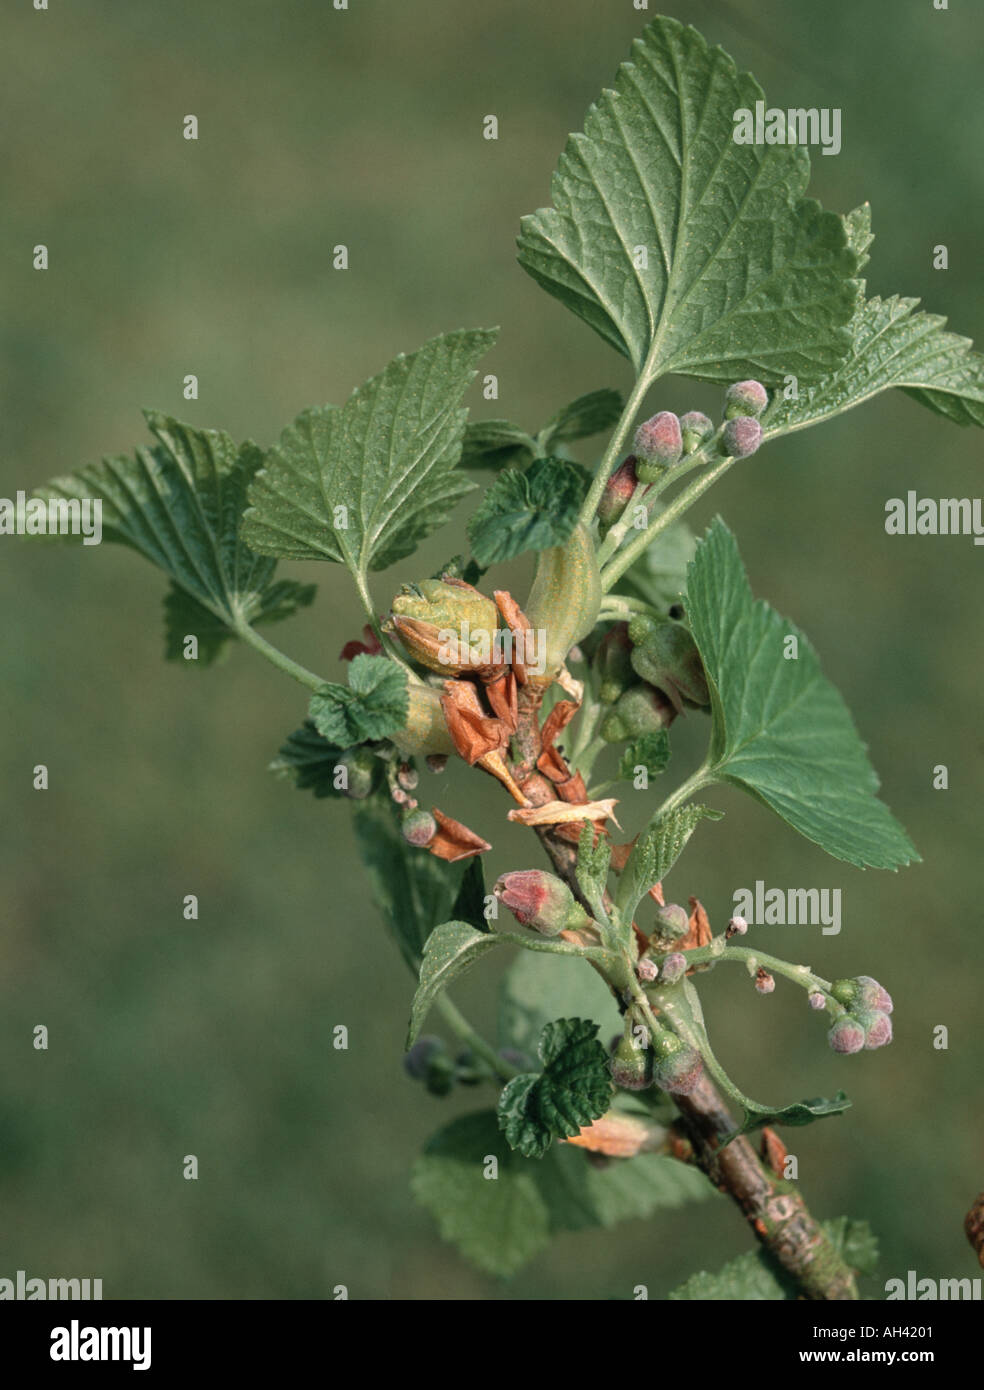 big bud blackcurrant gall mite Cecidophyopsis ribis damage to young black currant foliage Ribes Stock Photo